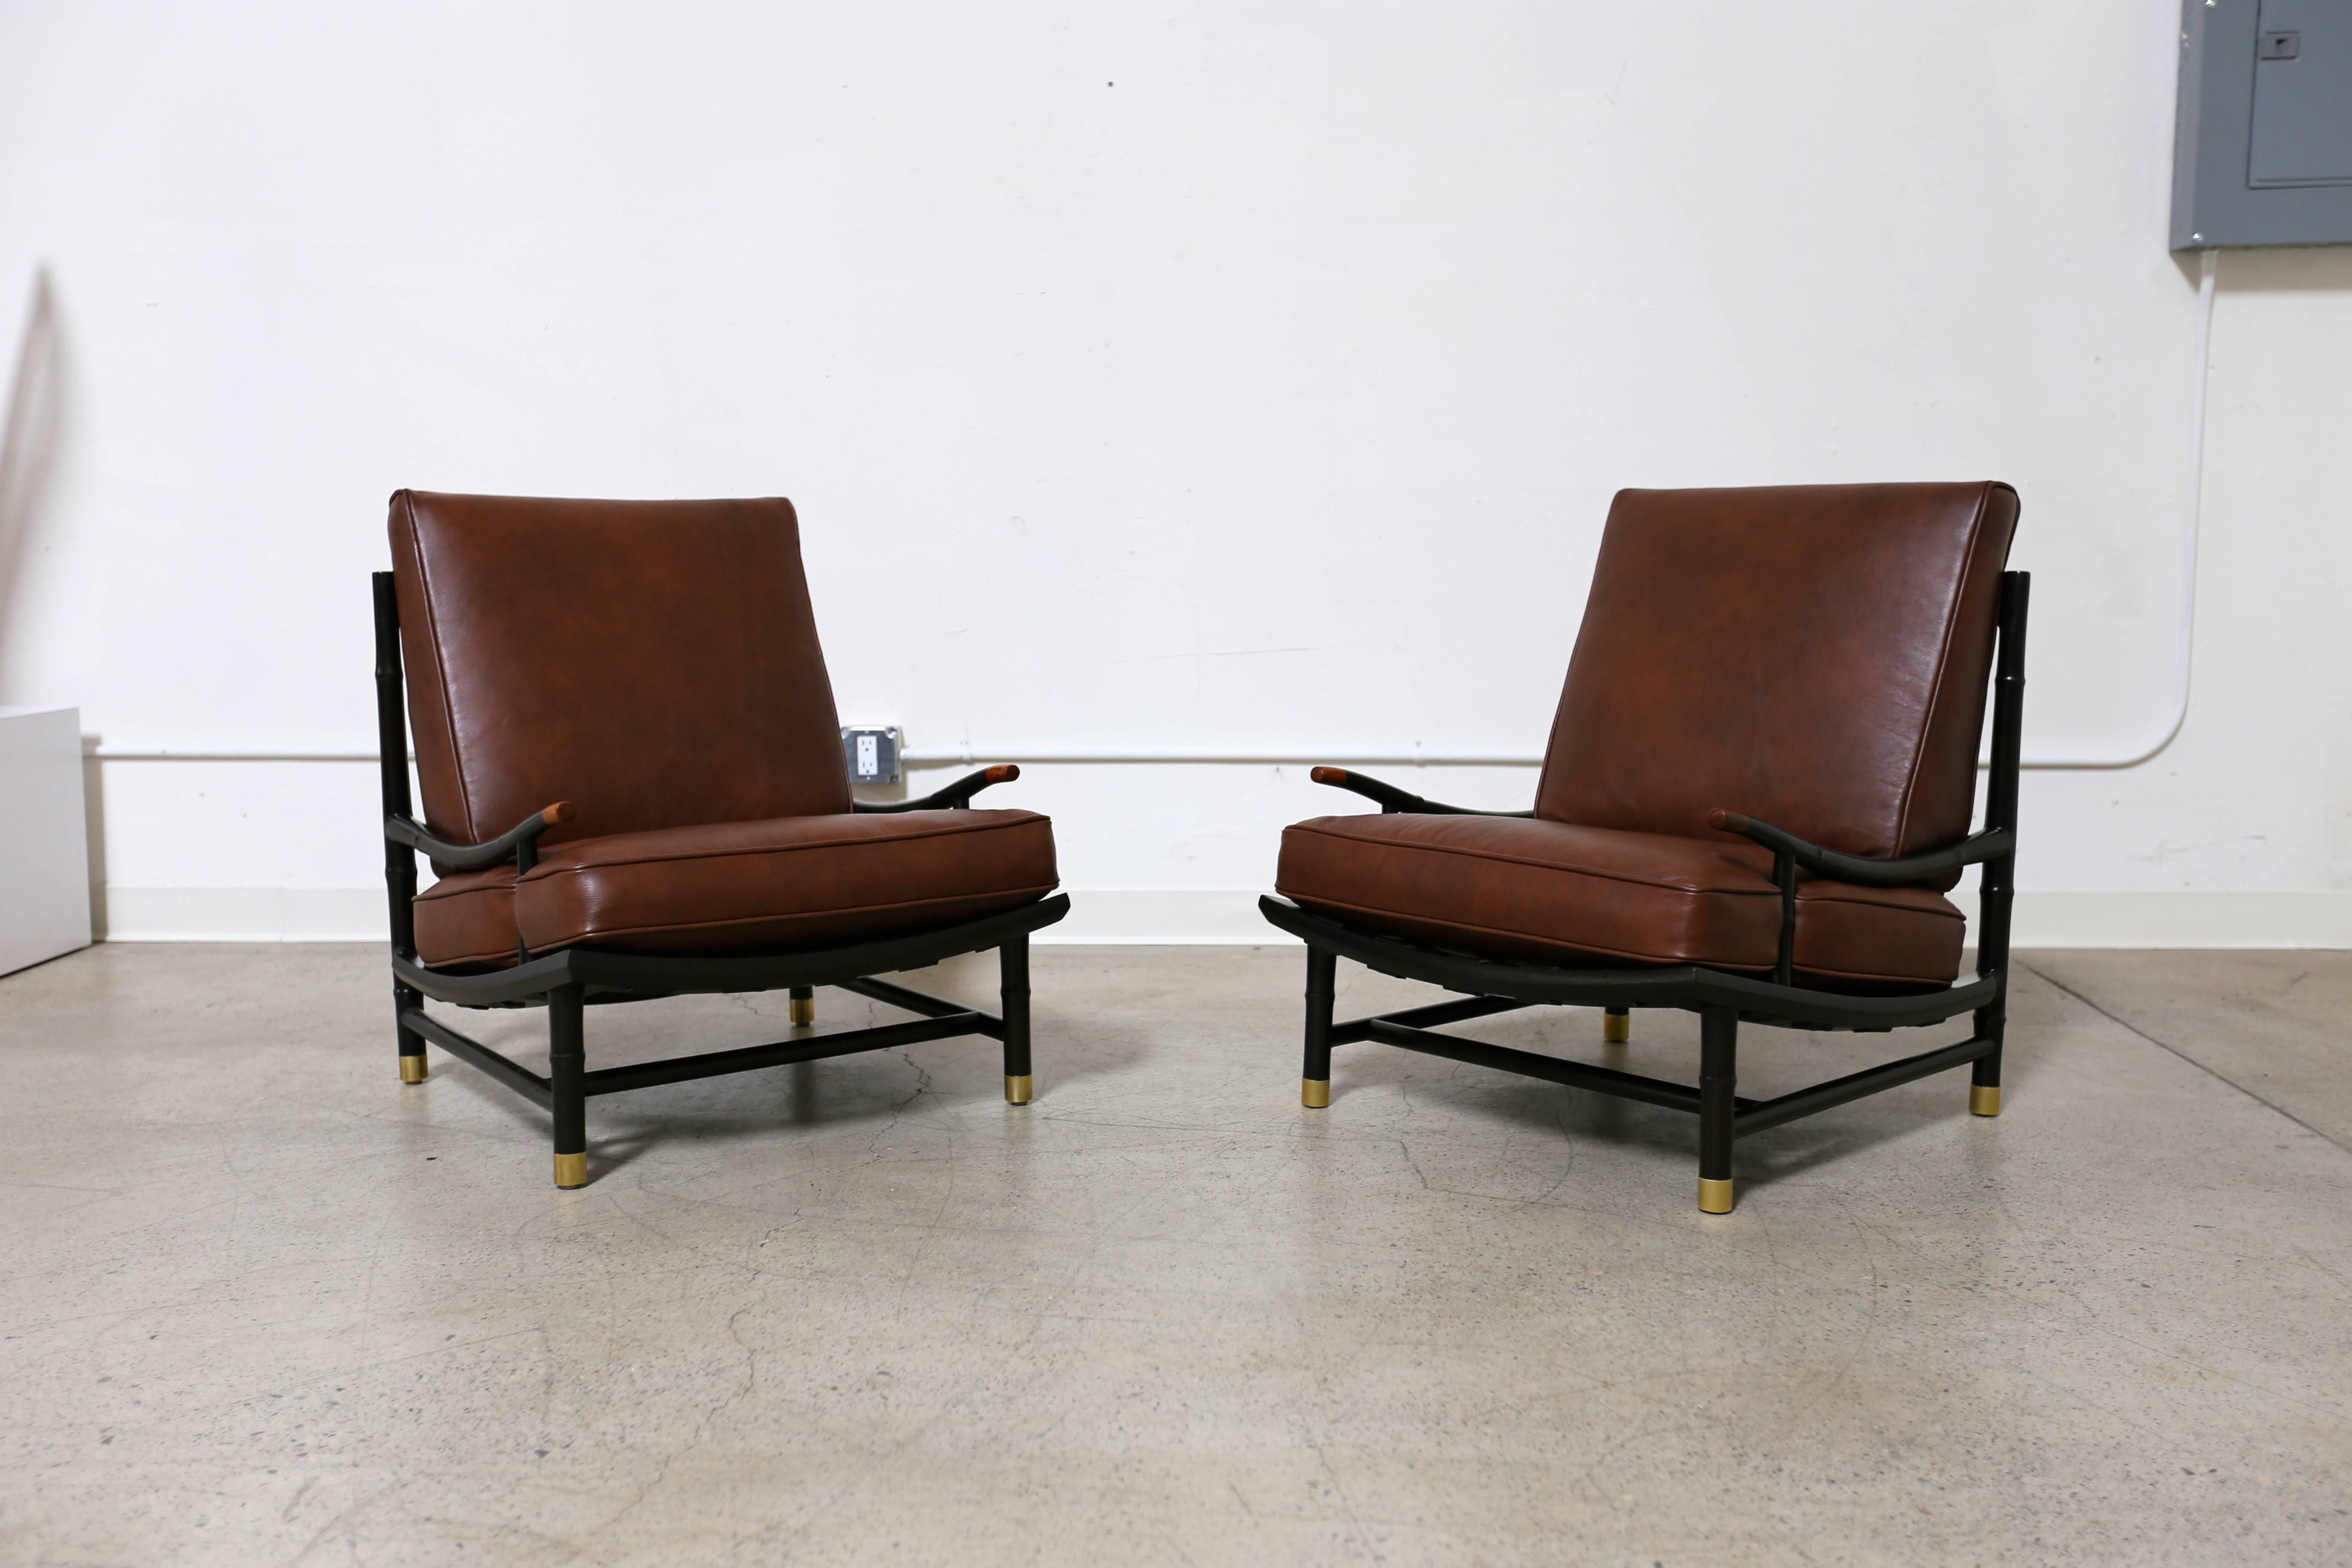 Rare lounge chairs by Frank Kyle with Maggie Howe. The lounge chairs are designed by designer Frank Kyle with enamel accents to the back by Maggie Howe. 